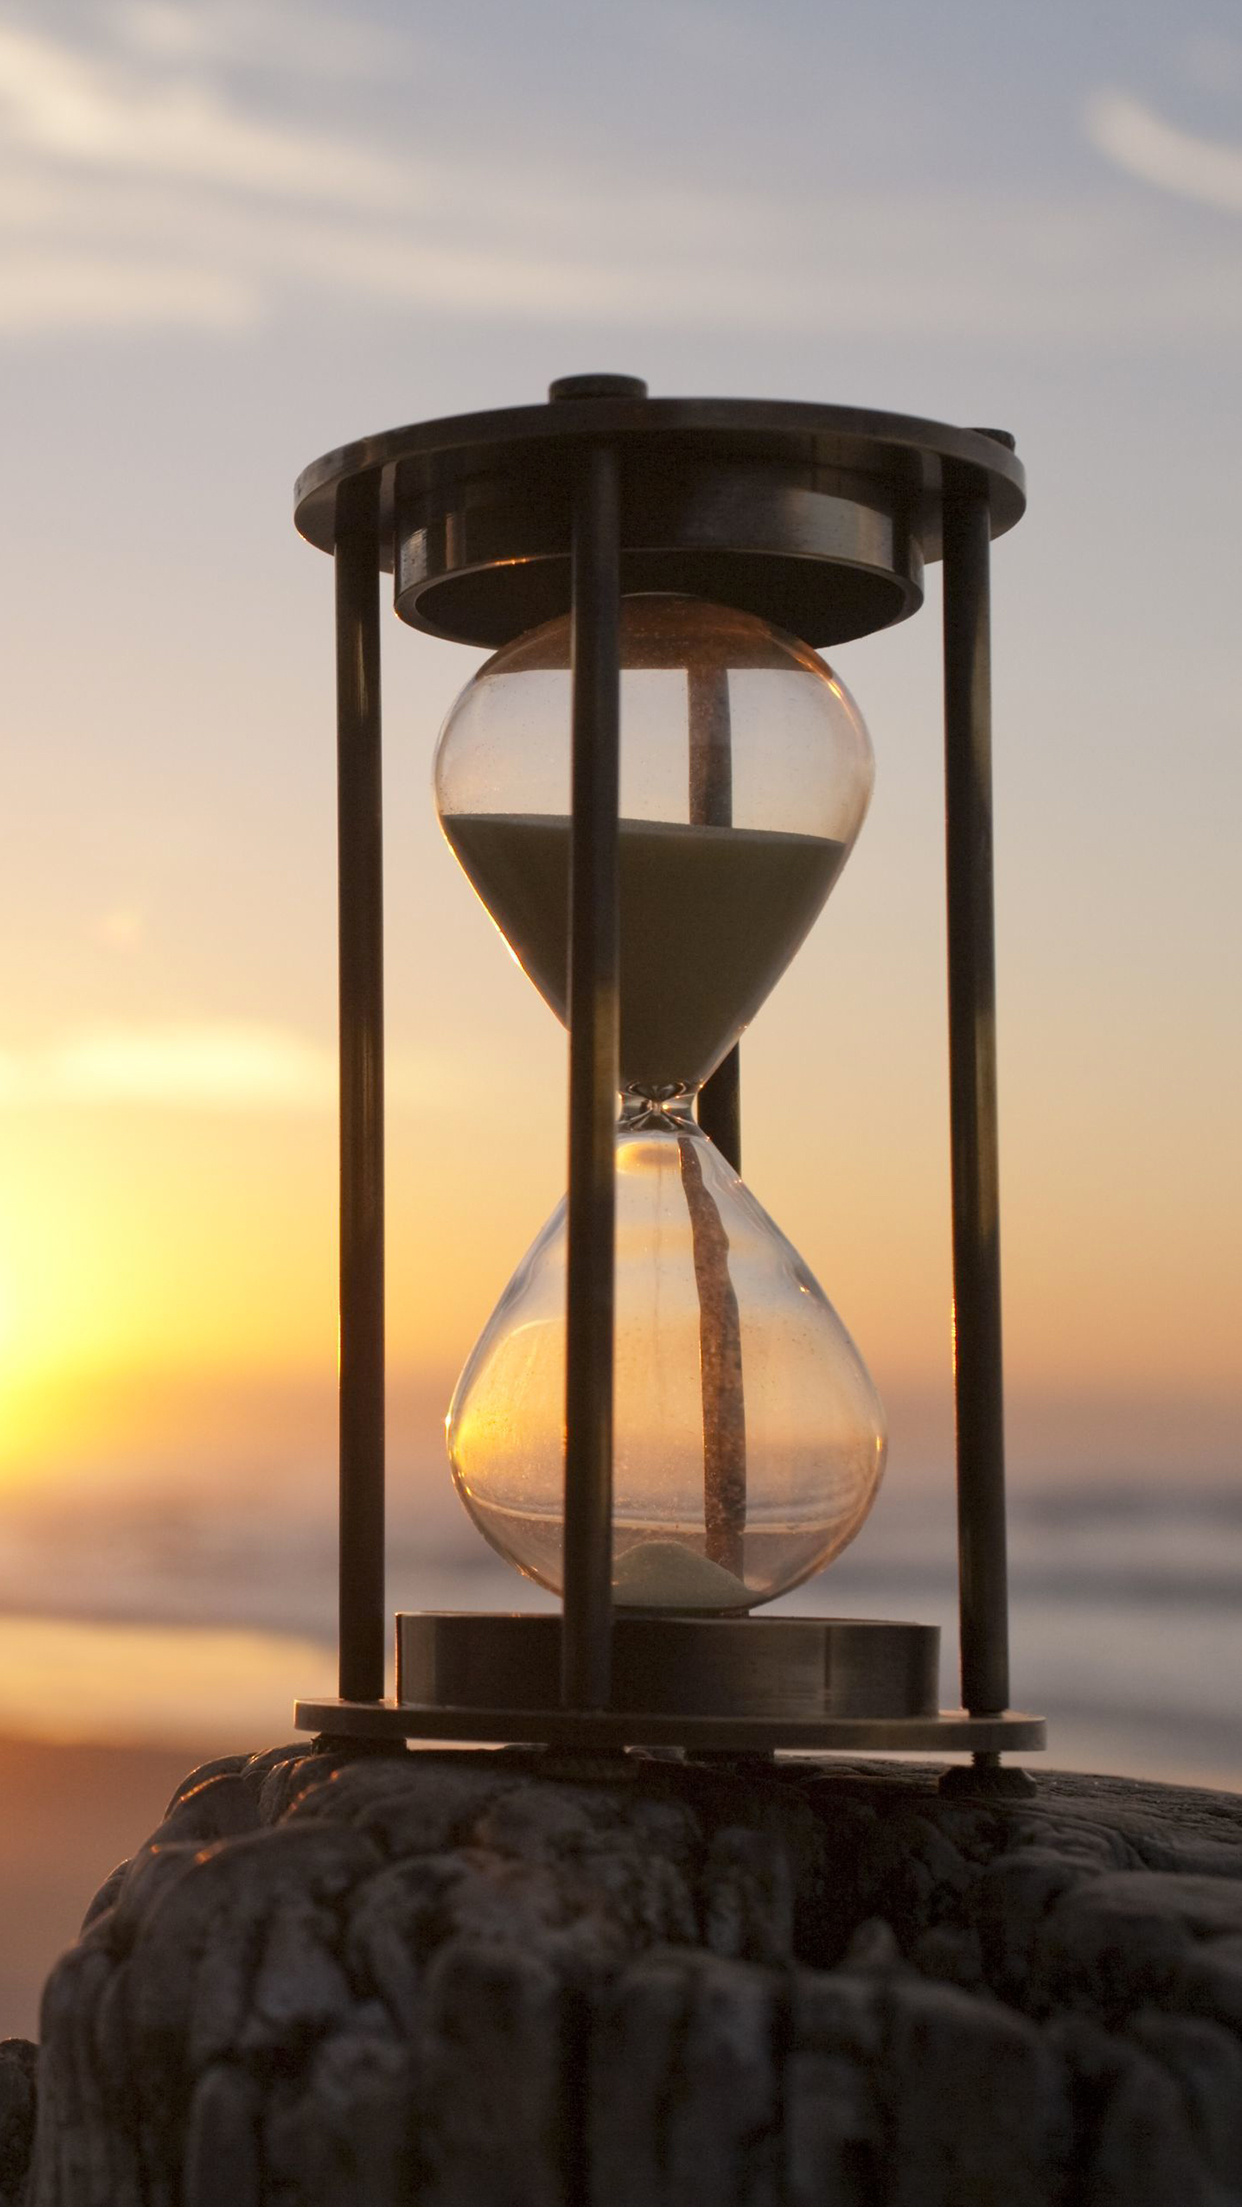 Hourglass sunset, iPhone wallpaper, Free download, 3wallpapers, 1250x2210 HD Phone